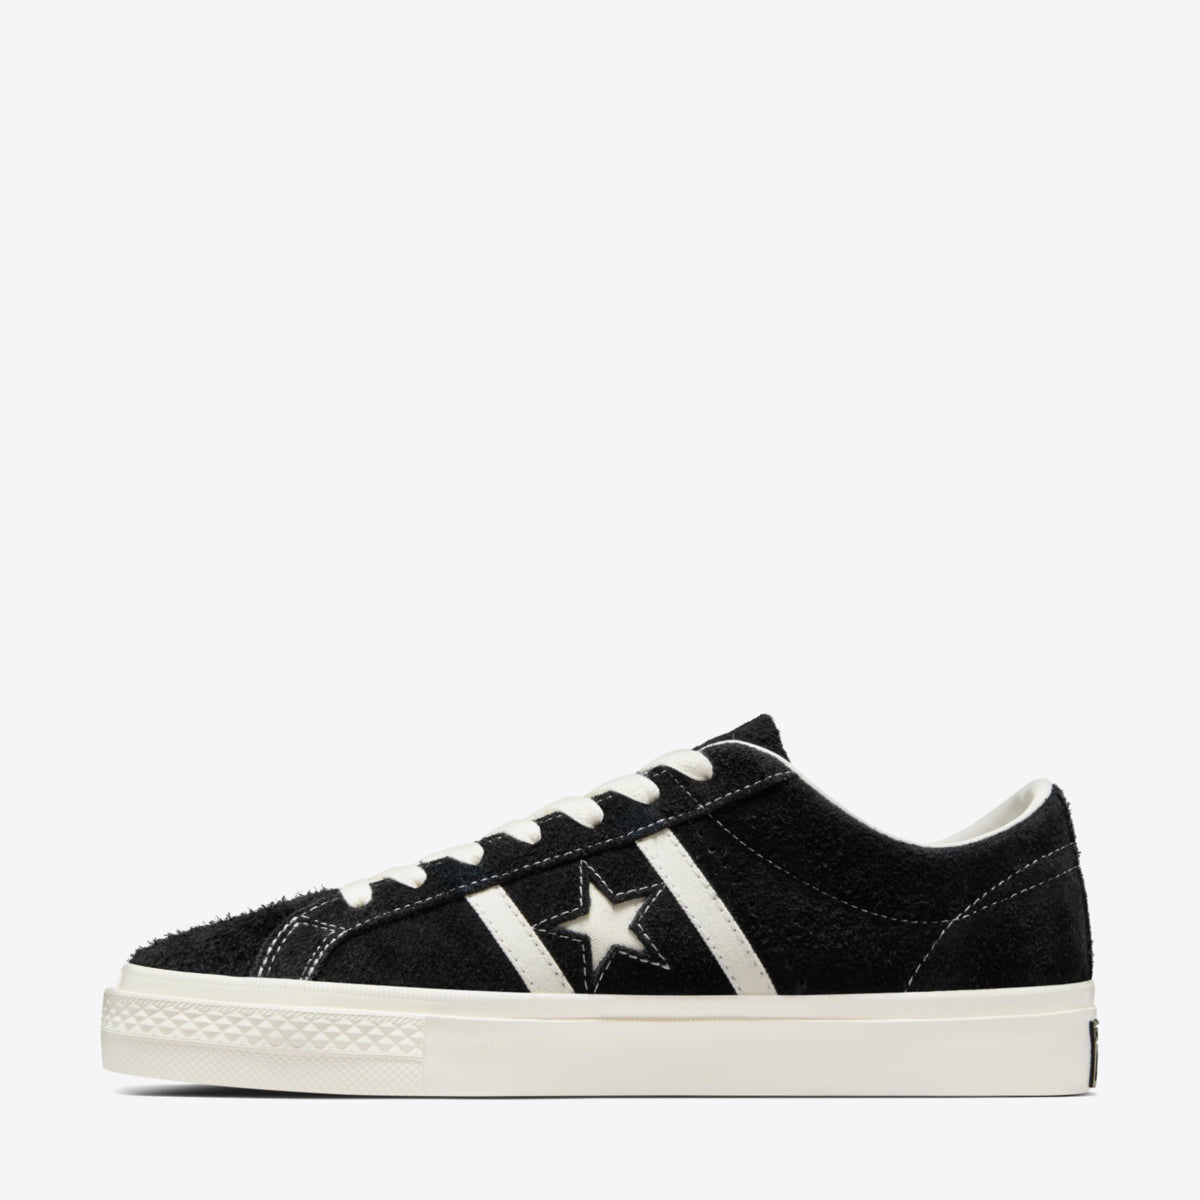 CONVERSE One Star Academy Pro Low Black/Egret - Image 3